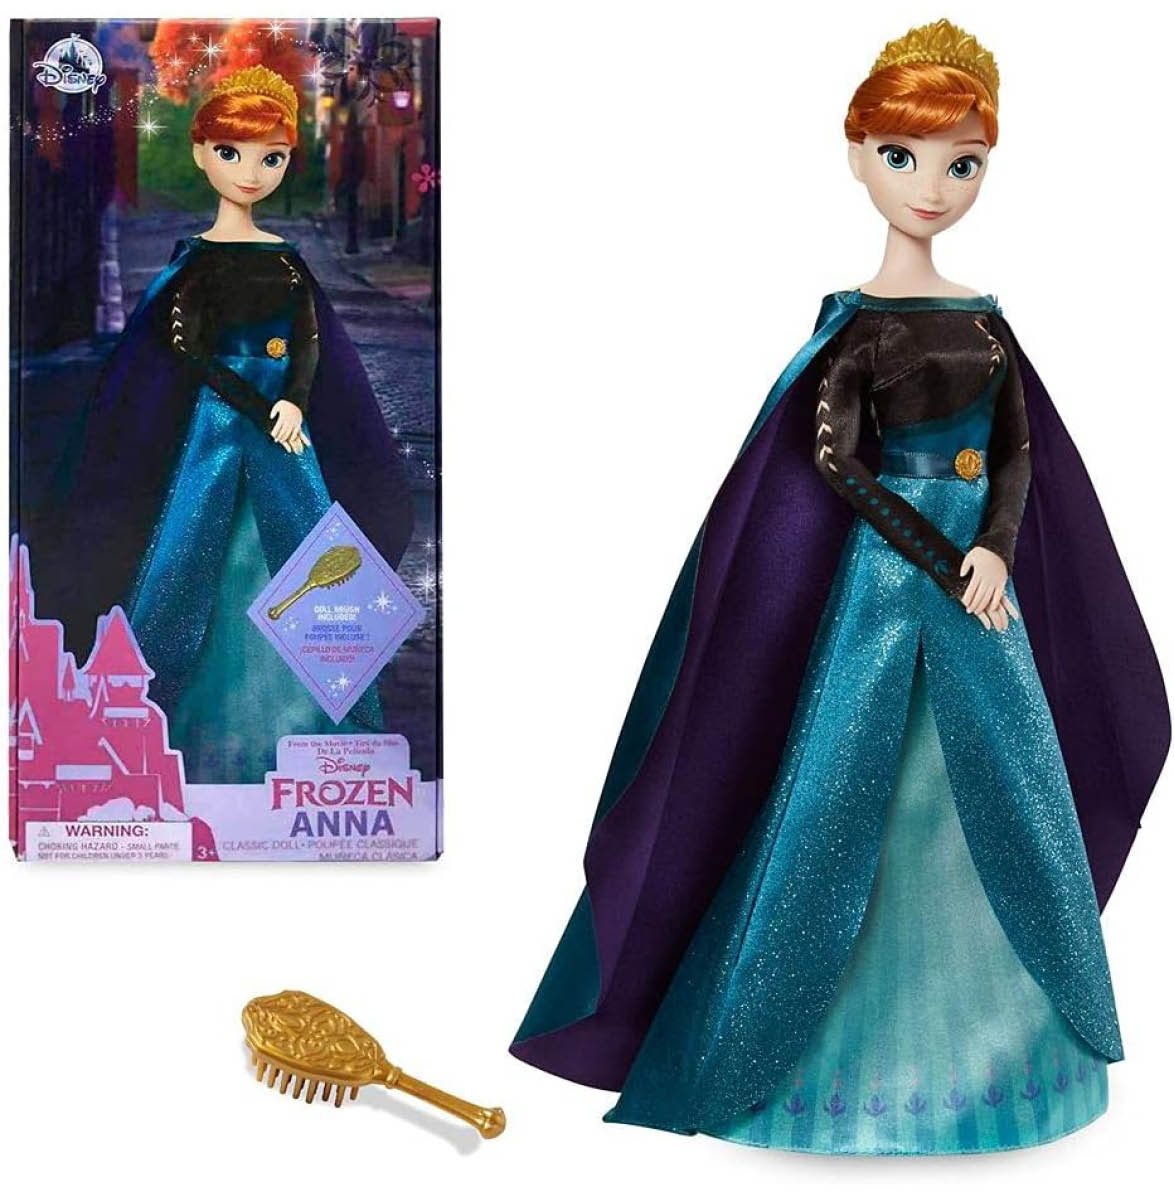 Disney Frozen Anna Classic Doll and Outer Box